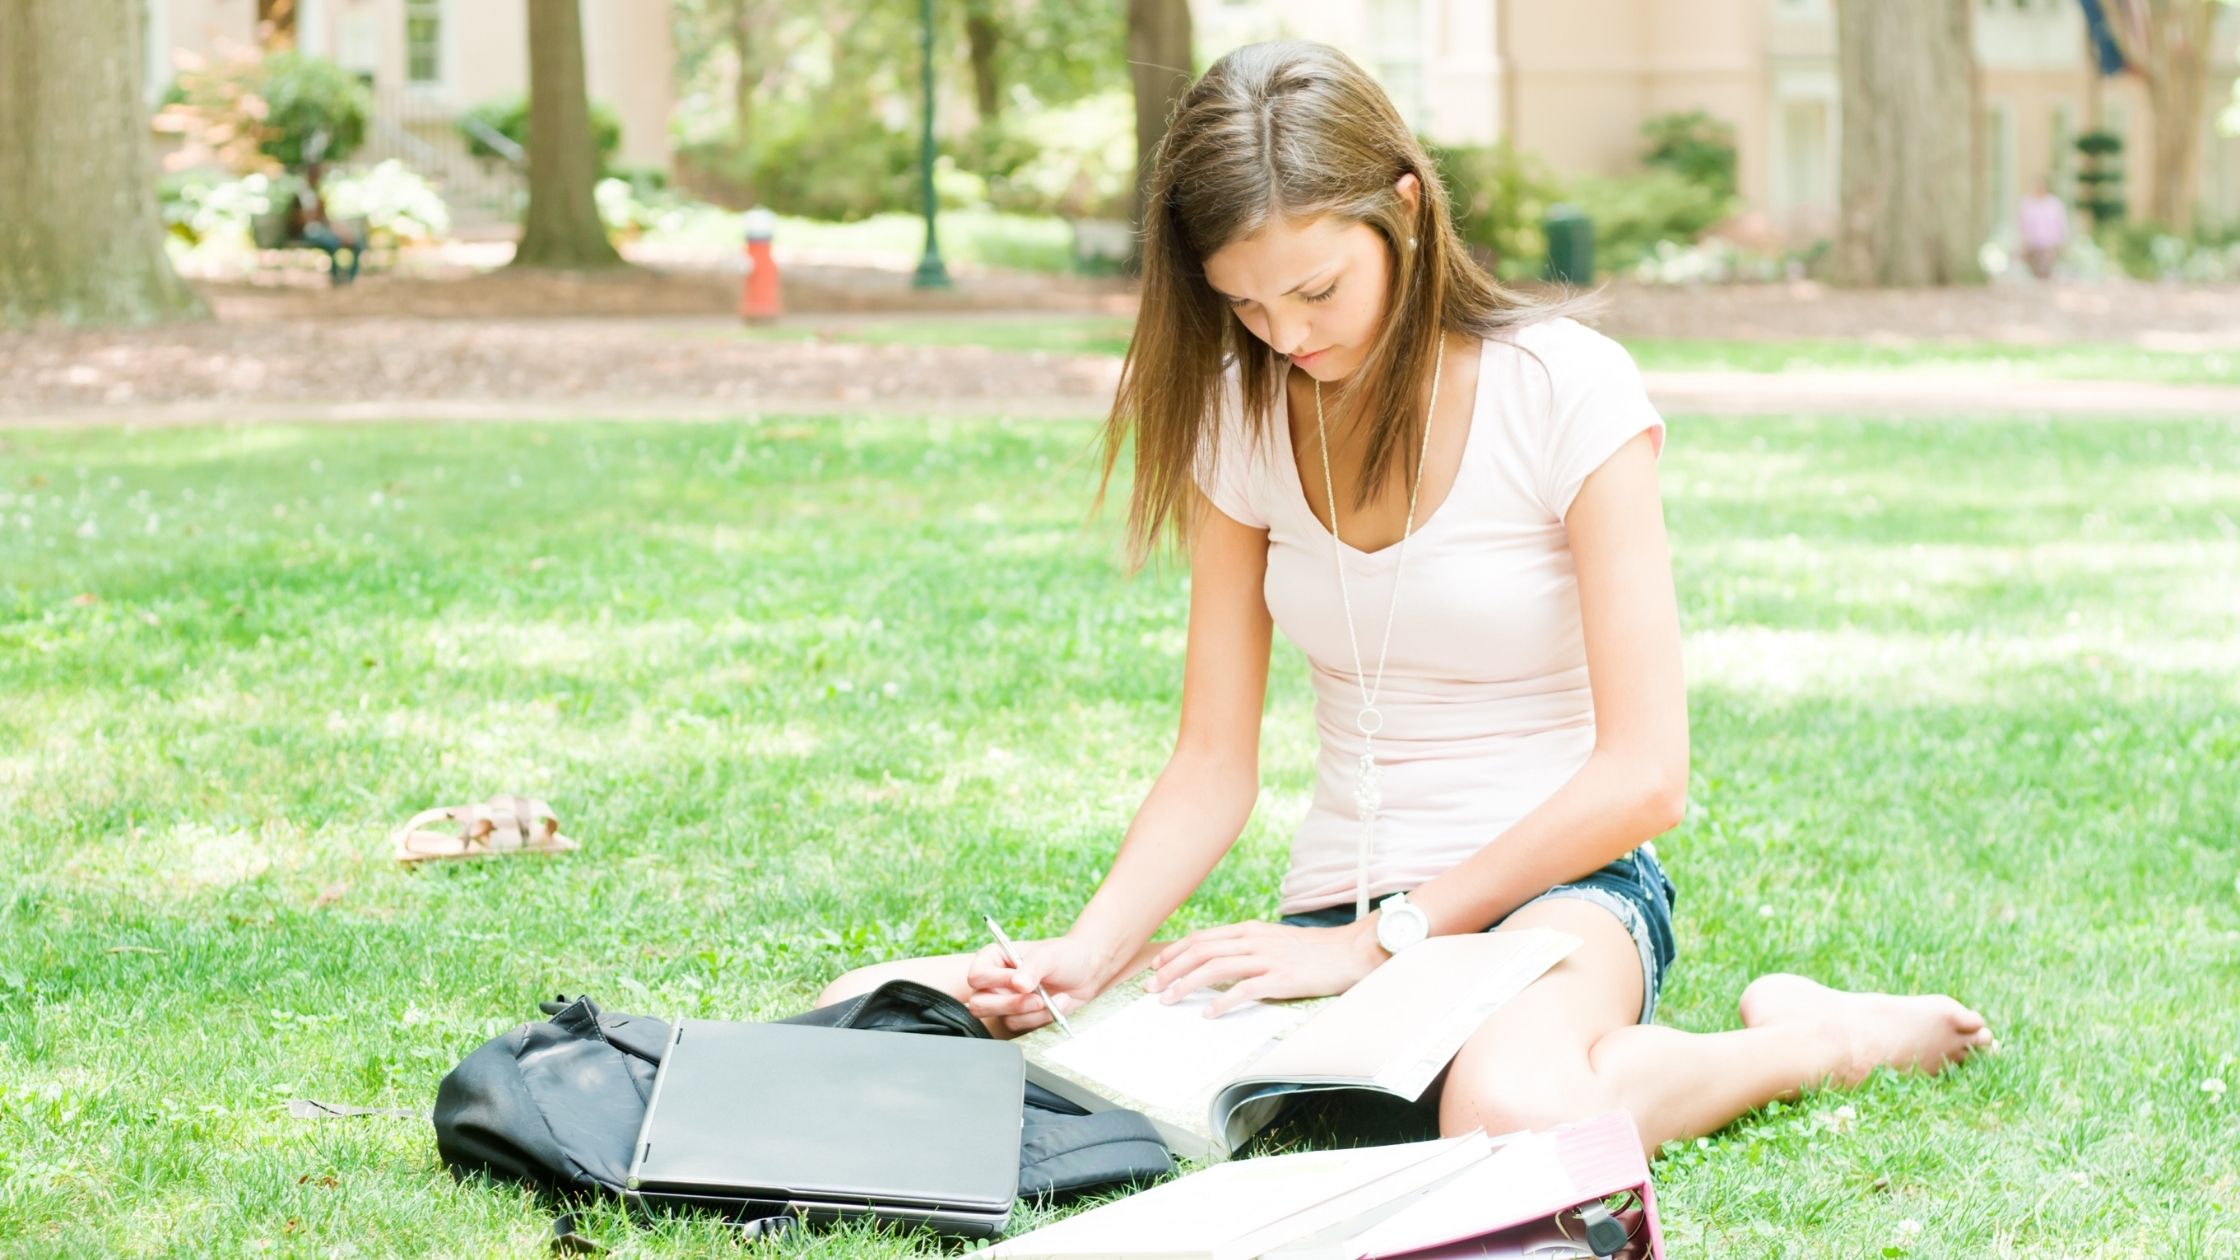 High school student reading books while sitting on grass earning college credit